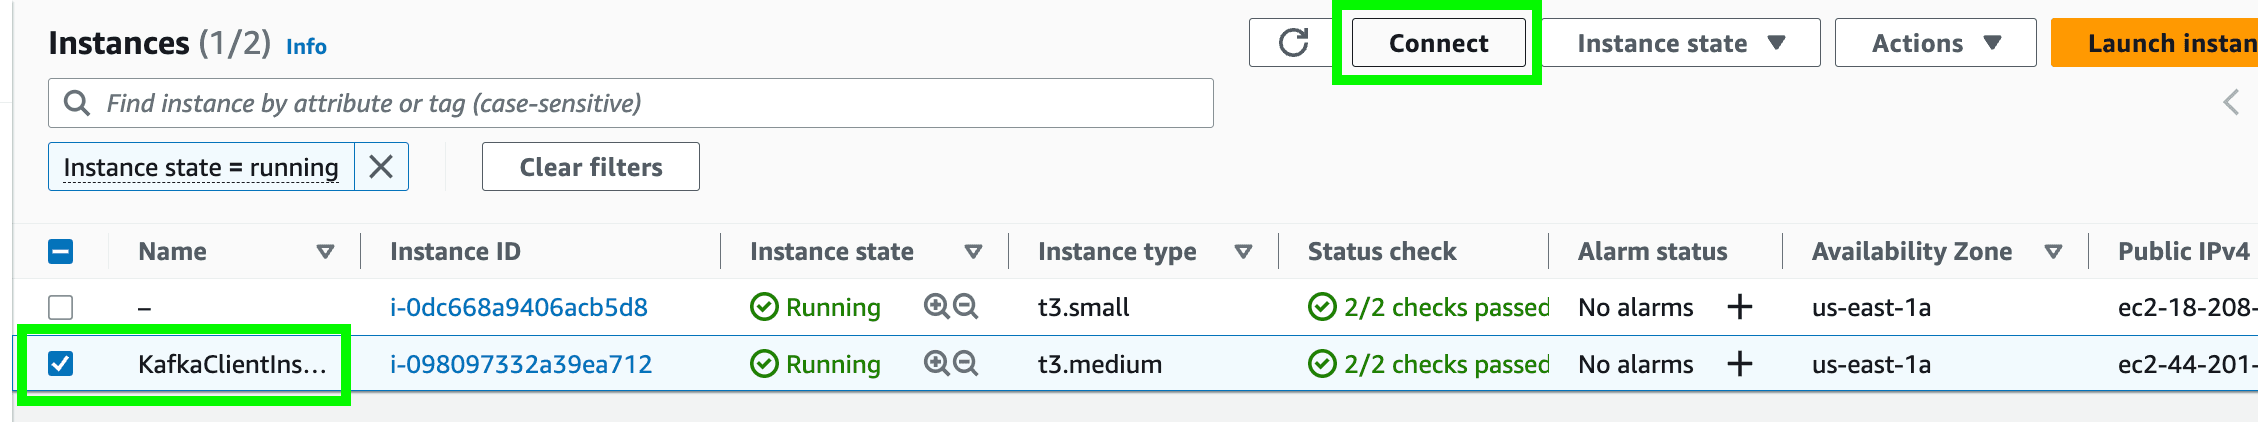 'Connect' button within the EC2 instances view